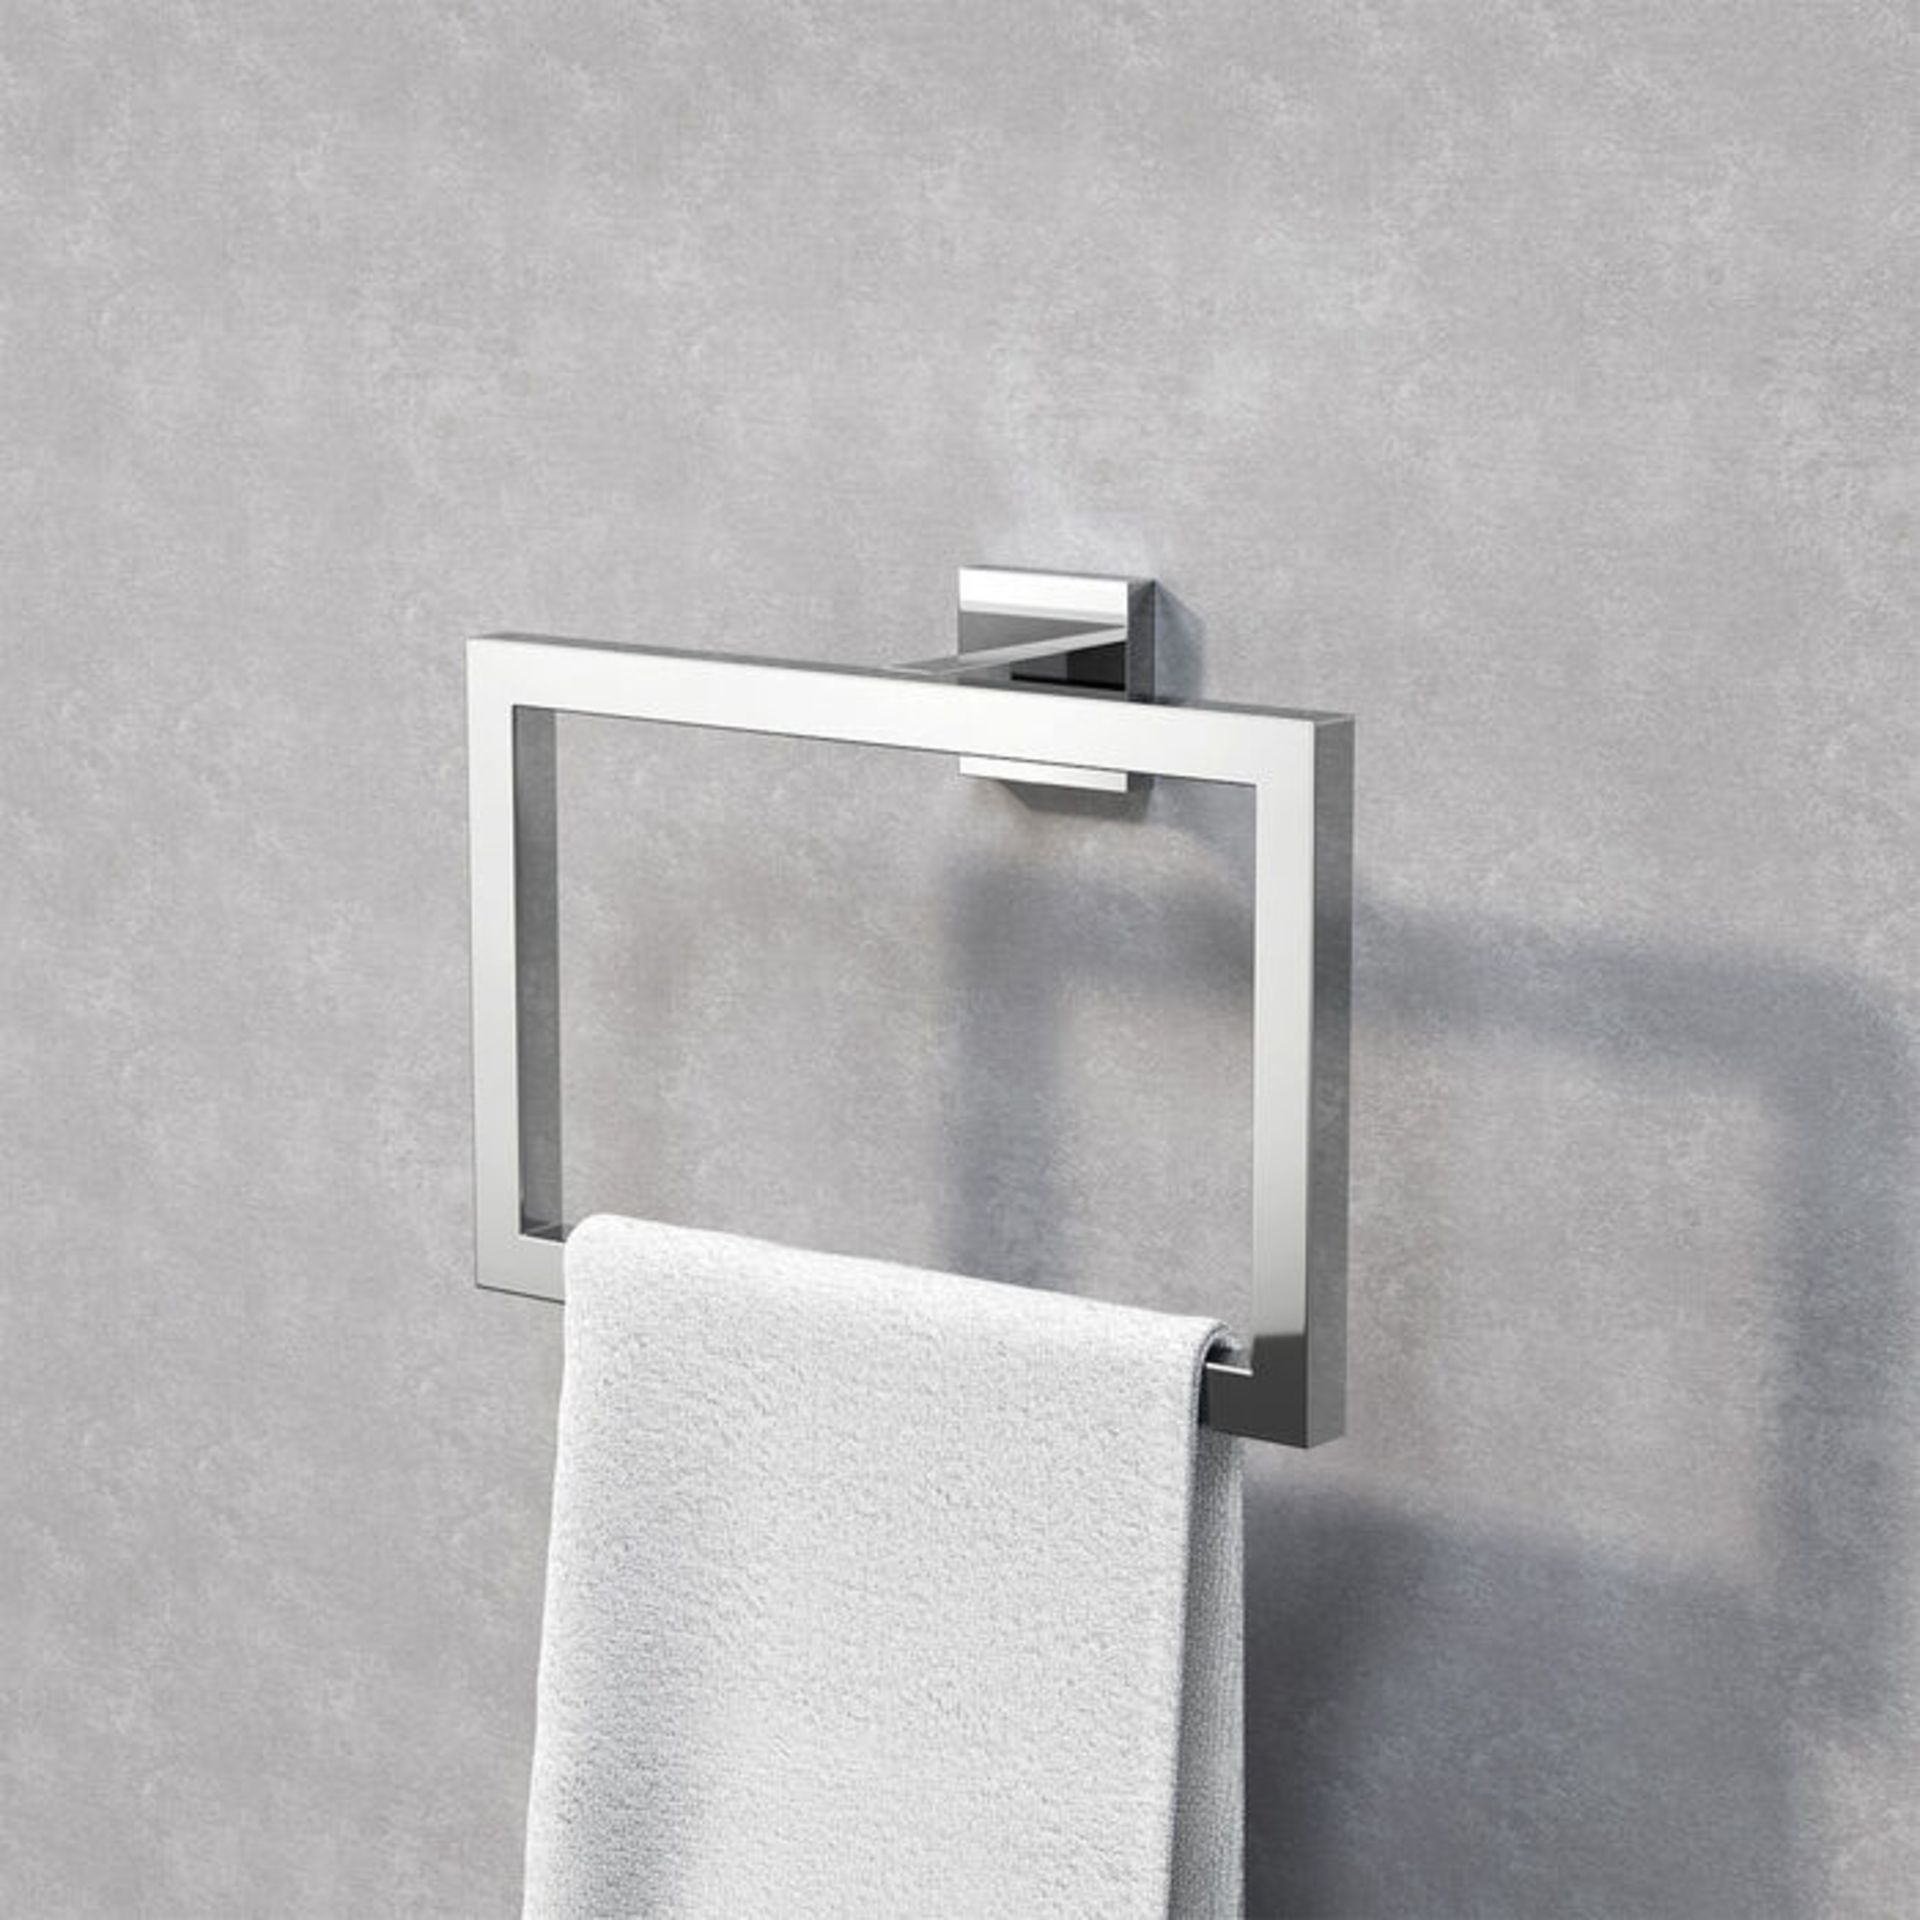 (QT1001) Jesmond Towel Ring Finishes your bathroom with a little extra functionality and style... - Image 4 of 8